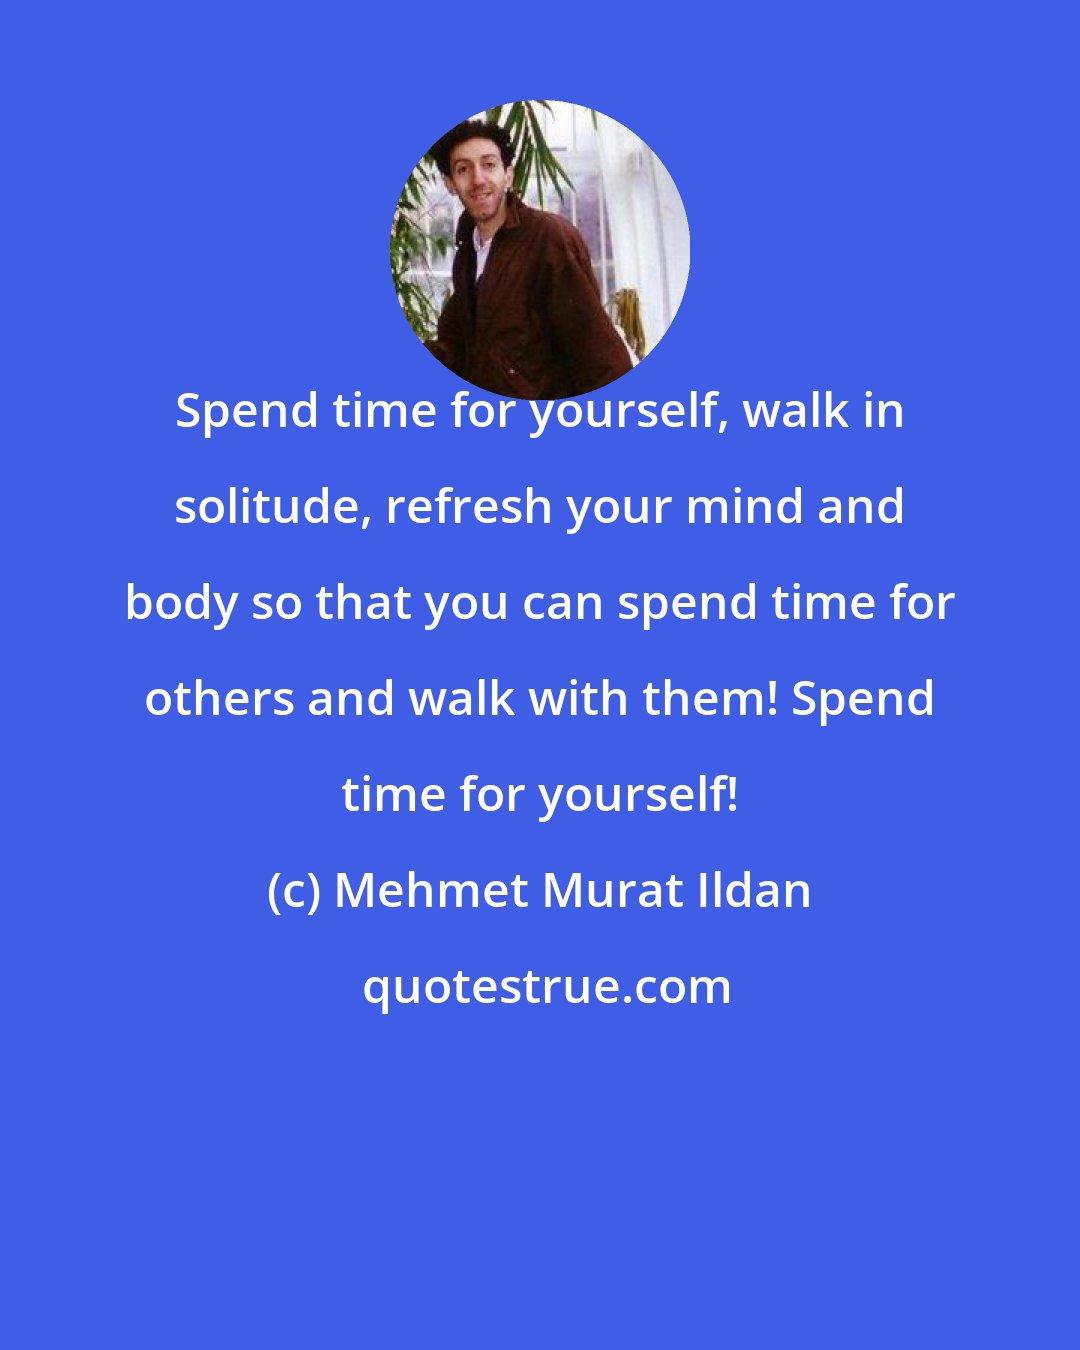 Mehmet Murat Ildan: Spend time for yourself, walk in solitude, refresh your mind and body so that you can spend time for others and walk with them! Spend time for yourself!